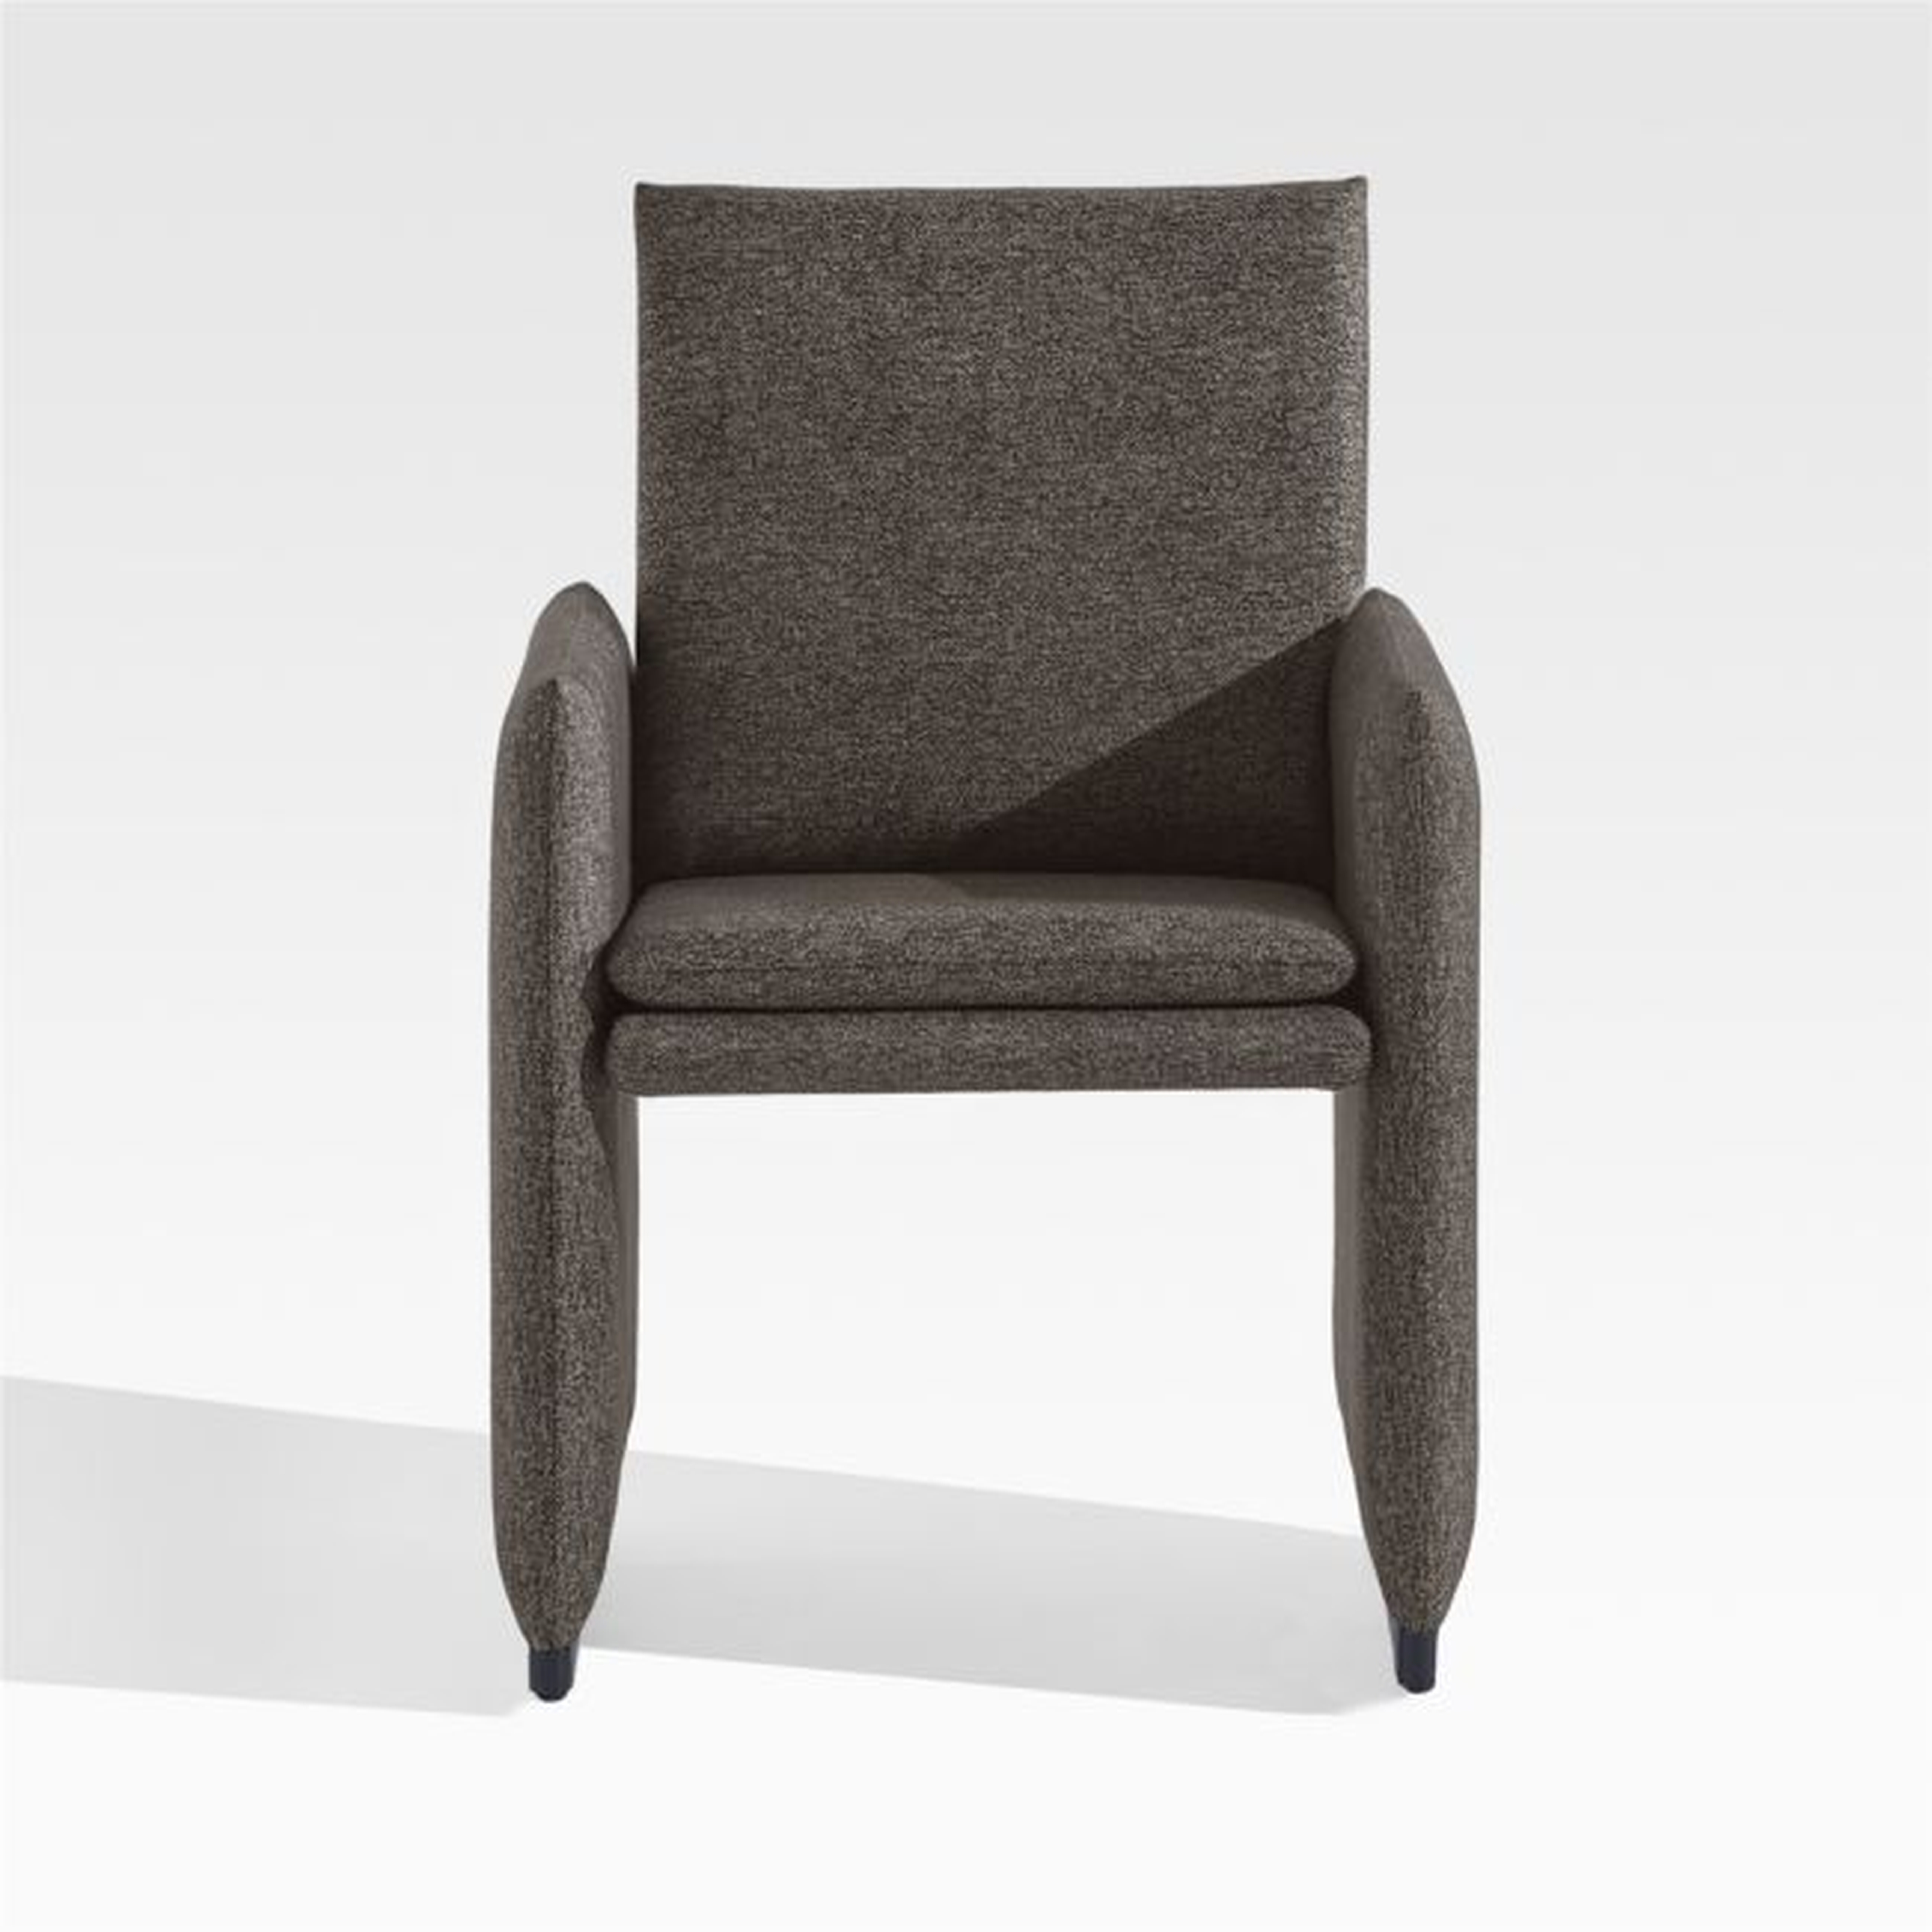 Zuma Upholstered Outdoor Dining Chair - Crate and Barrel